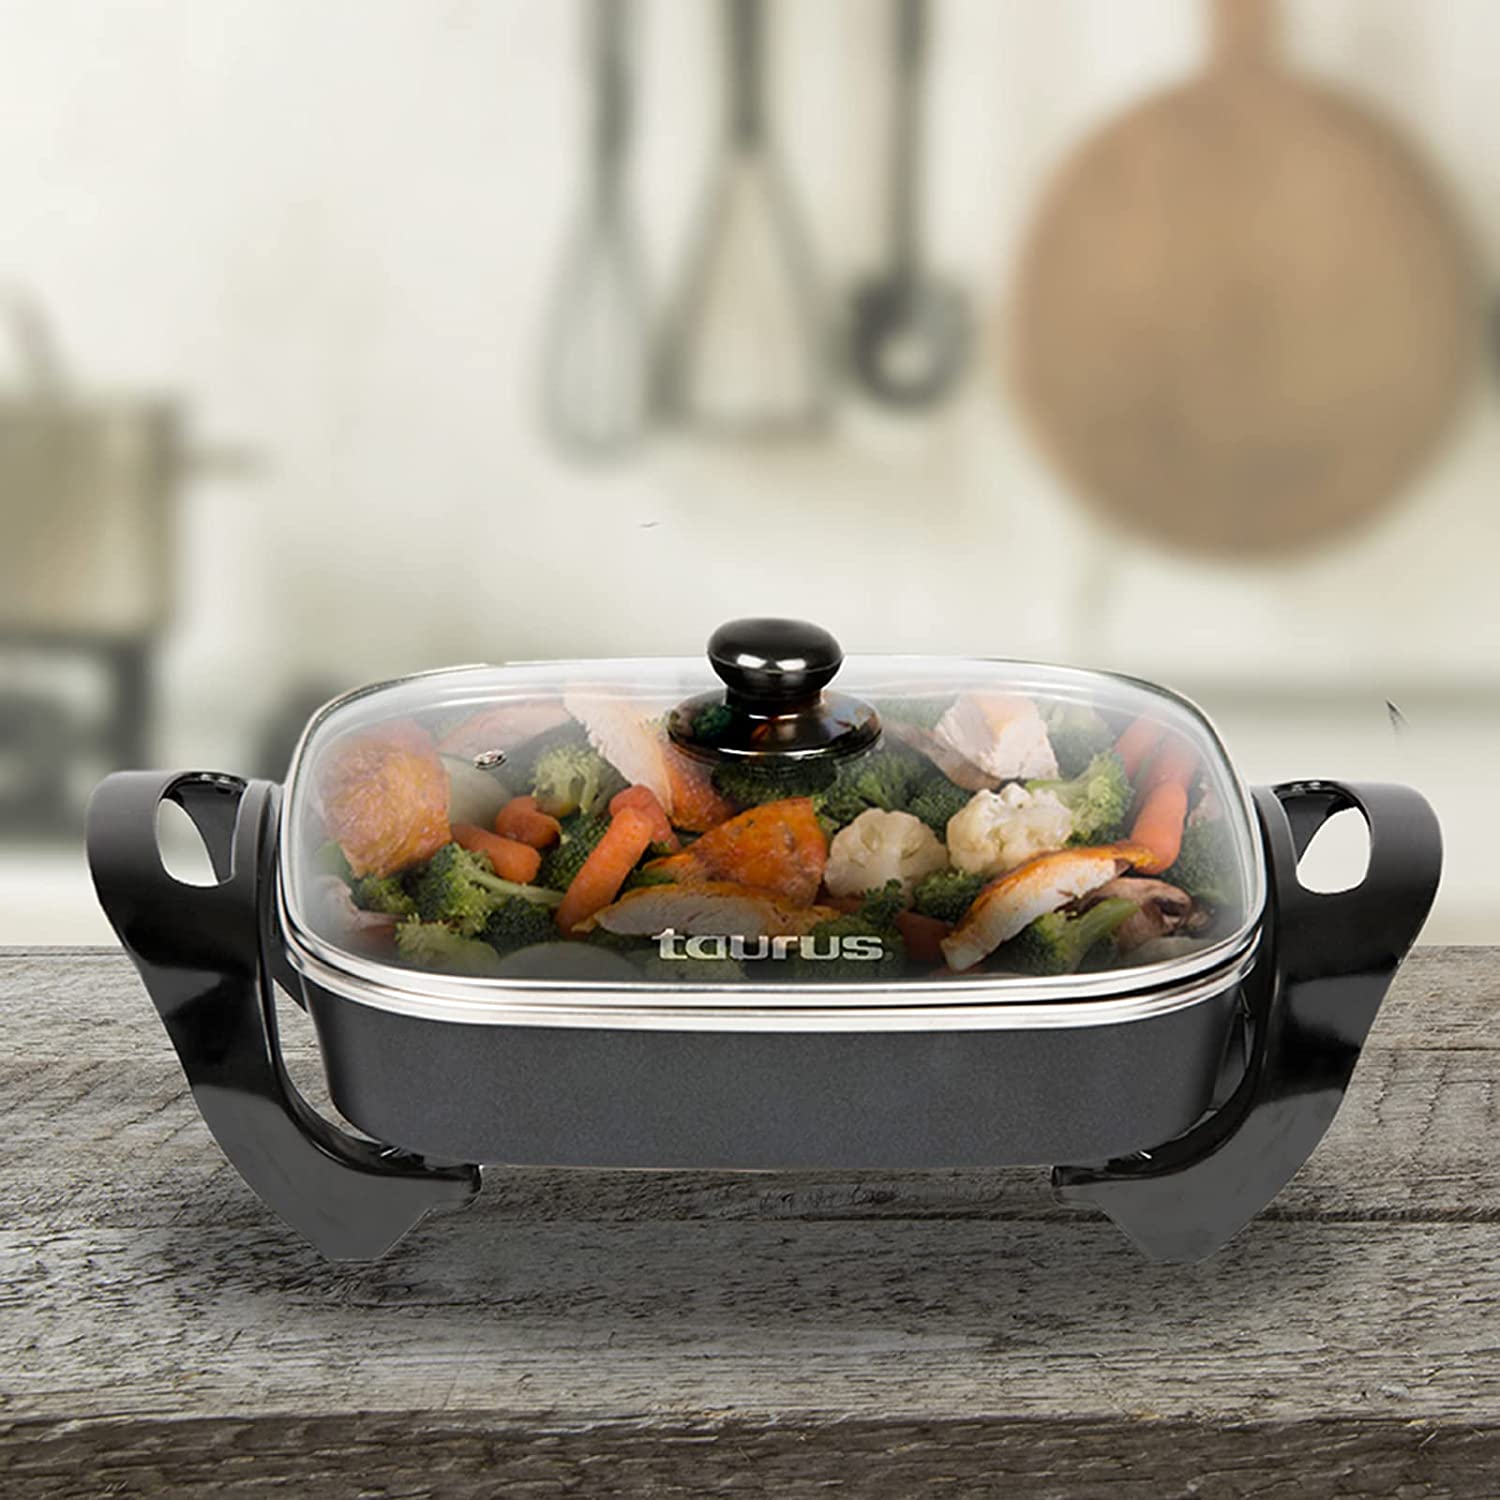 Which is the best Electric frying pan